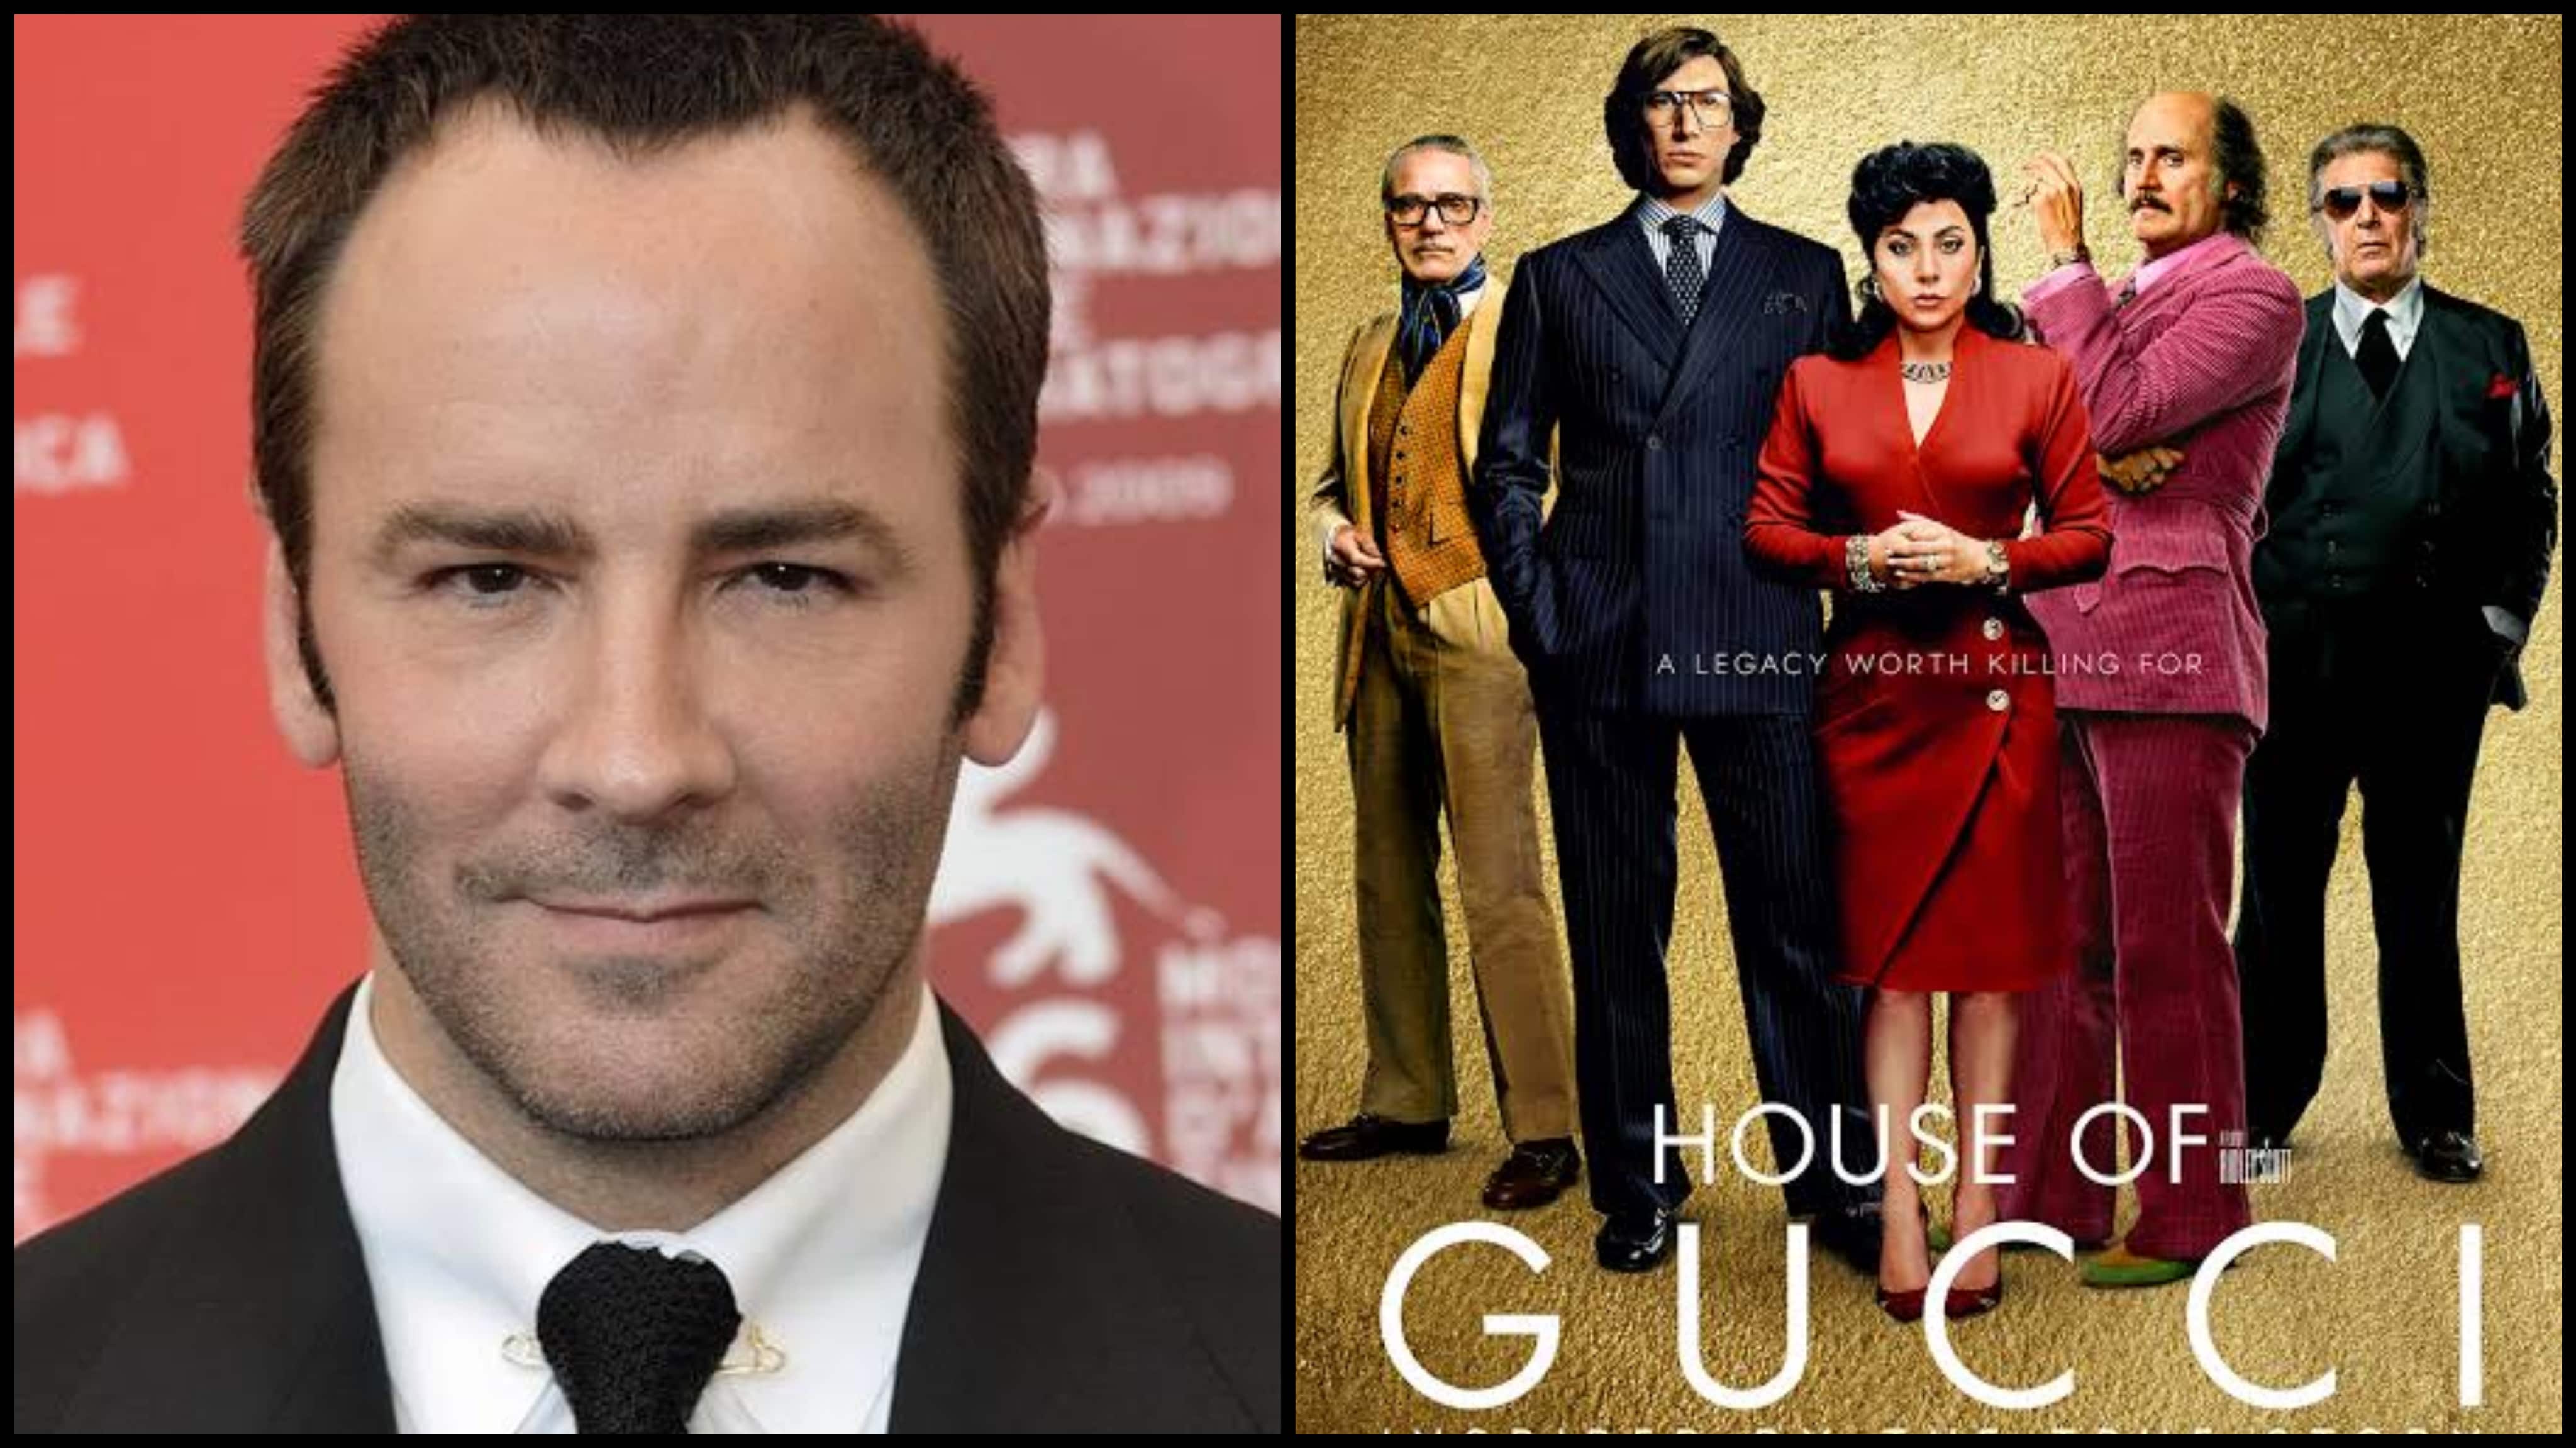 Tom Ford gave his honest review of House of Gucci